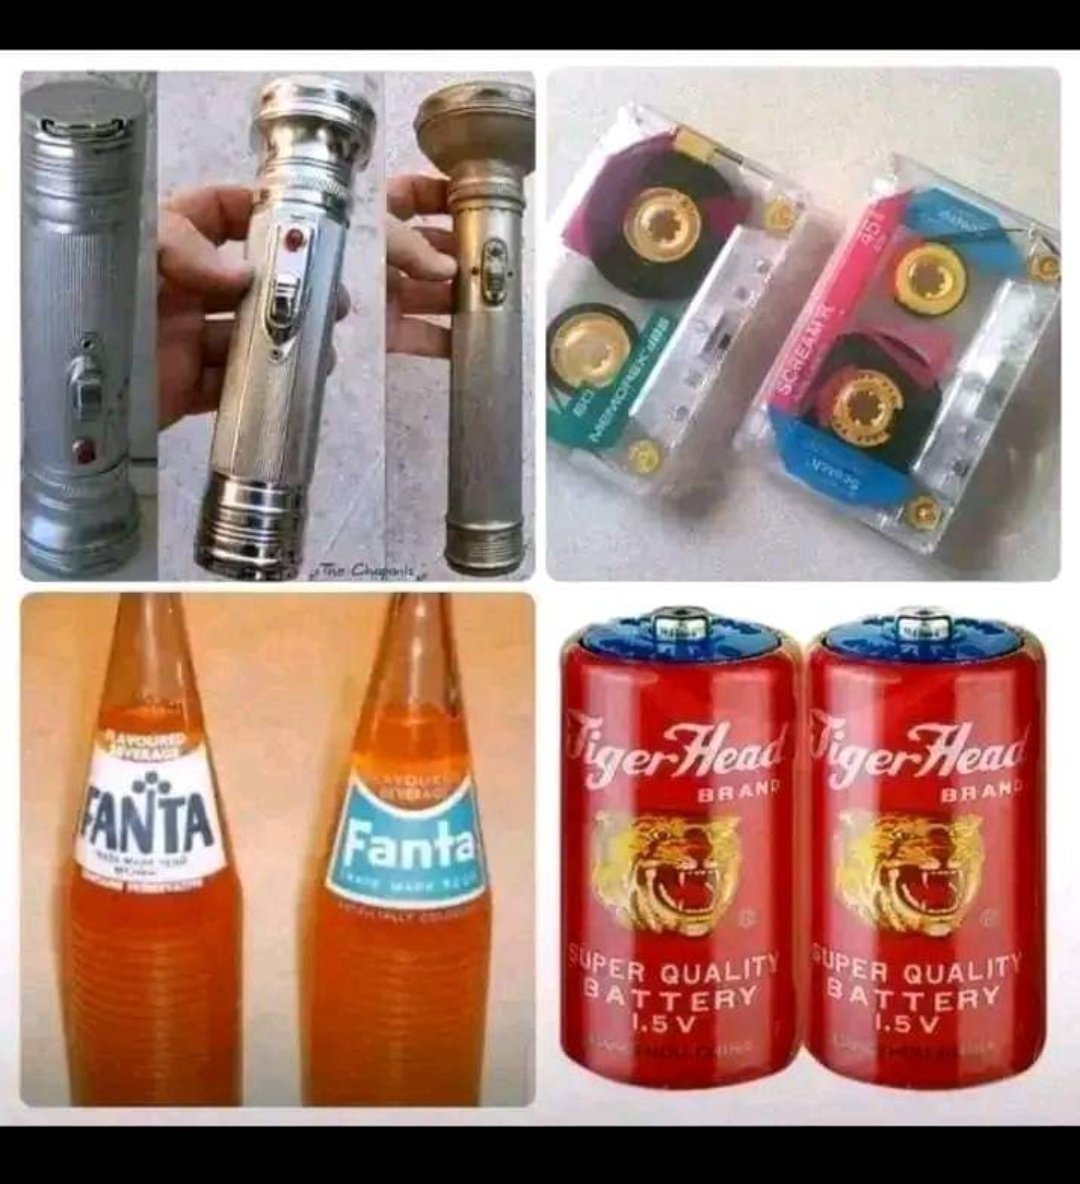 If you used any of these, raise up your hands😂😂😂